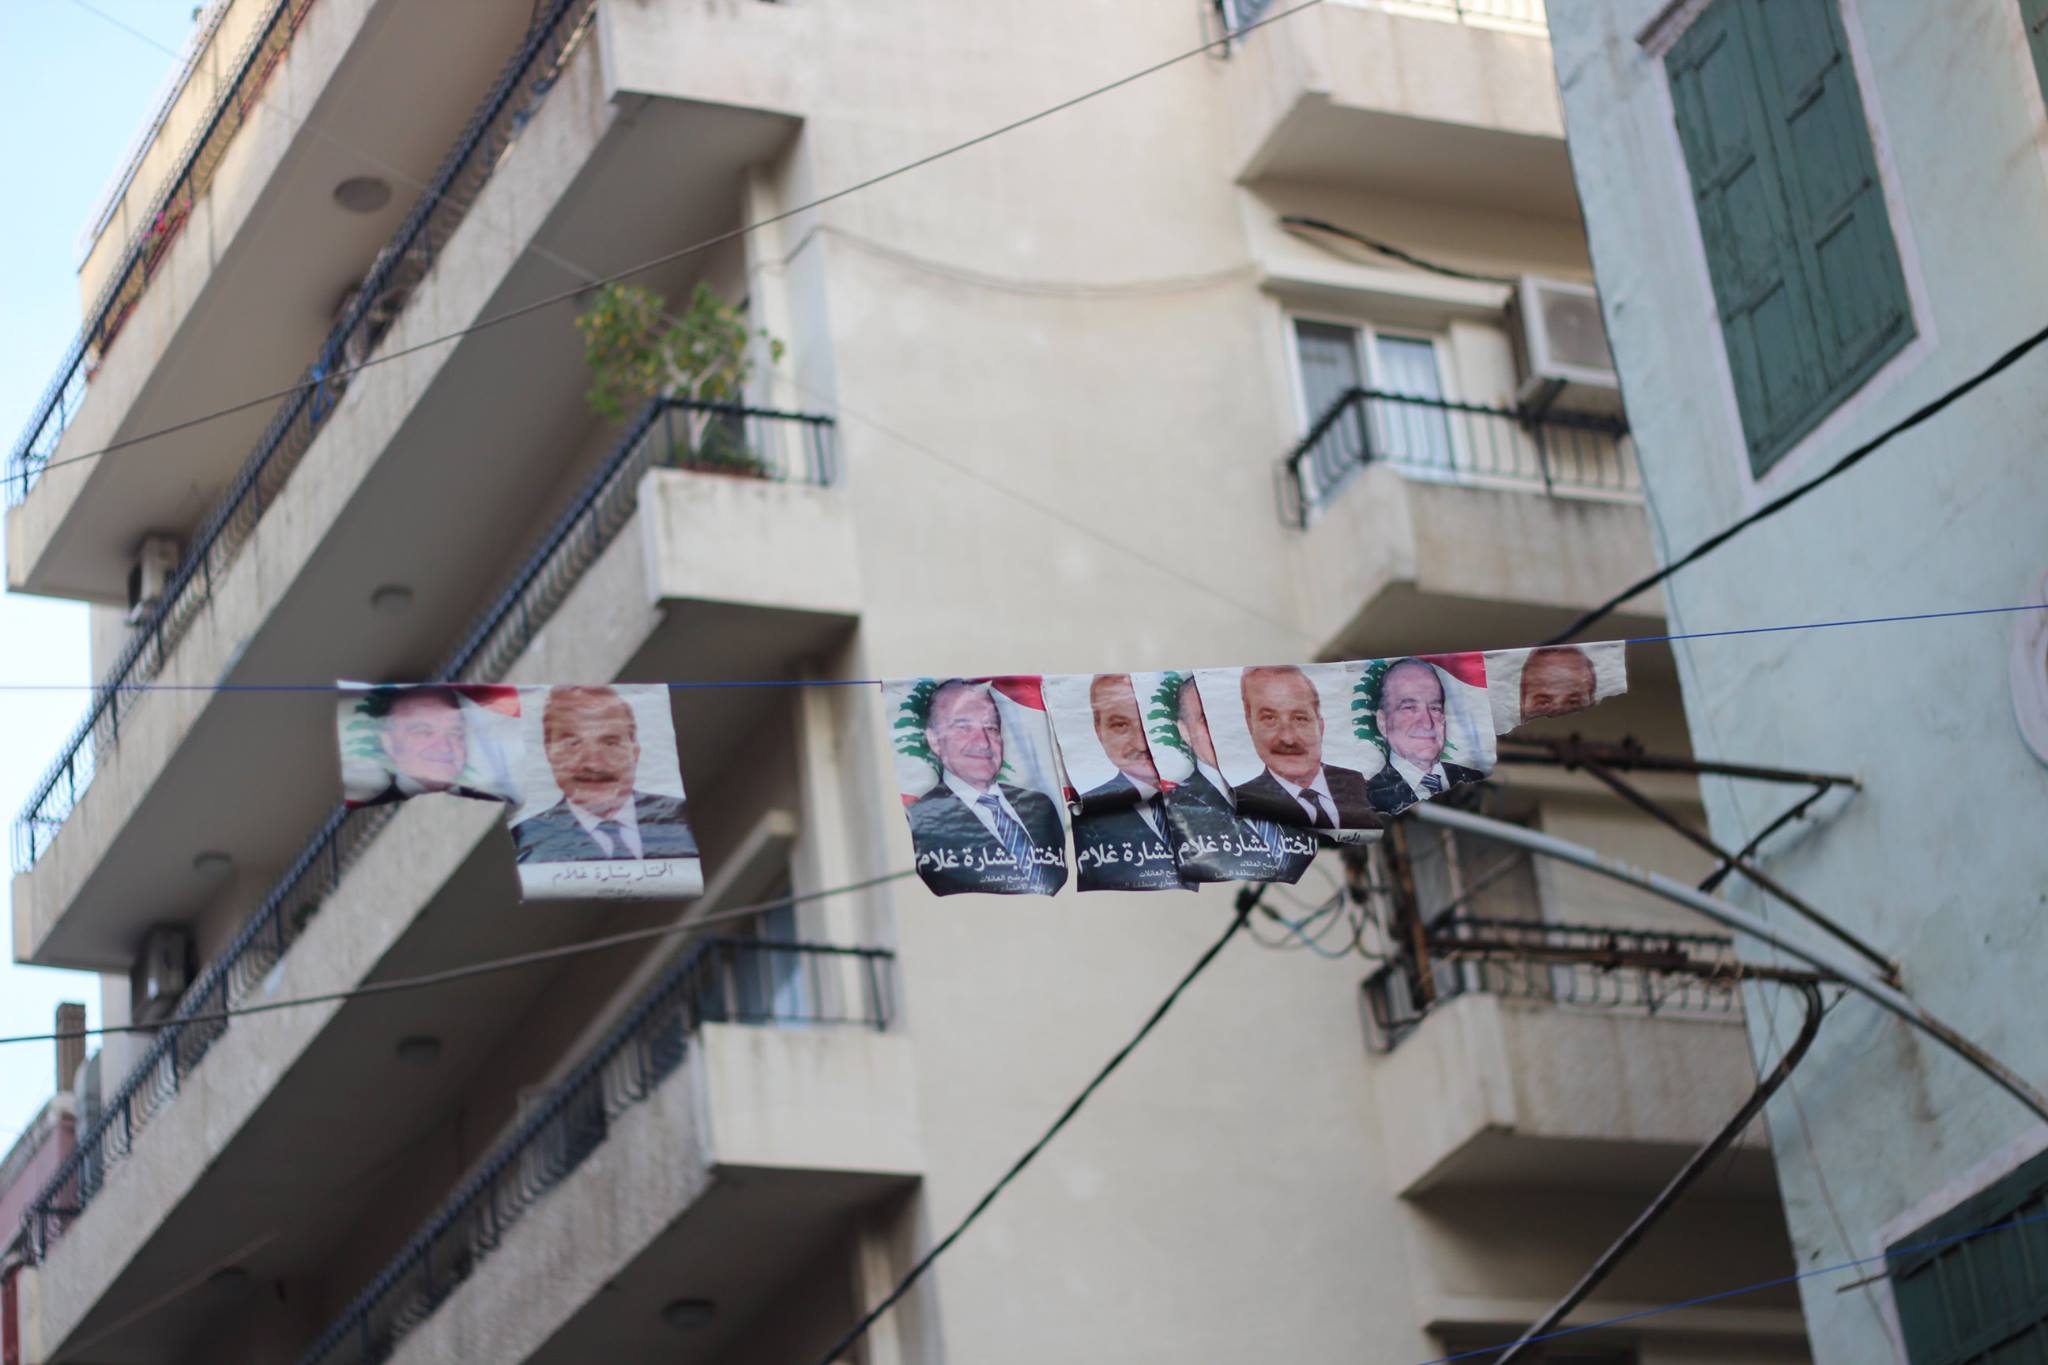 Candidates for the Beirut elections. Photo: The Turban Times